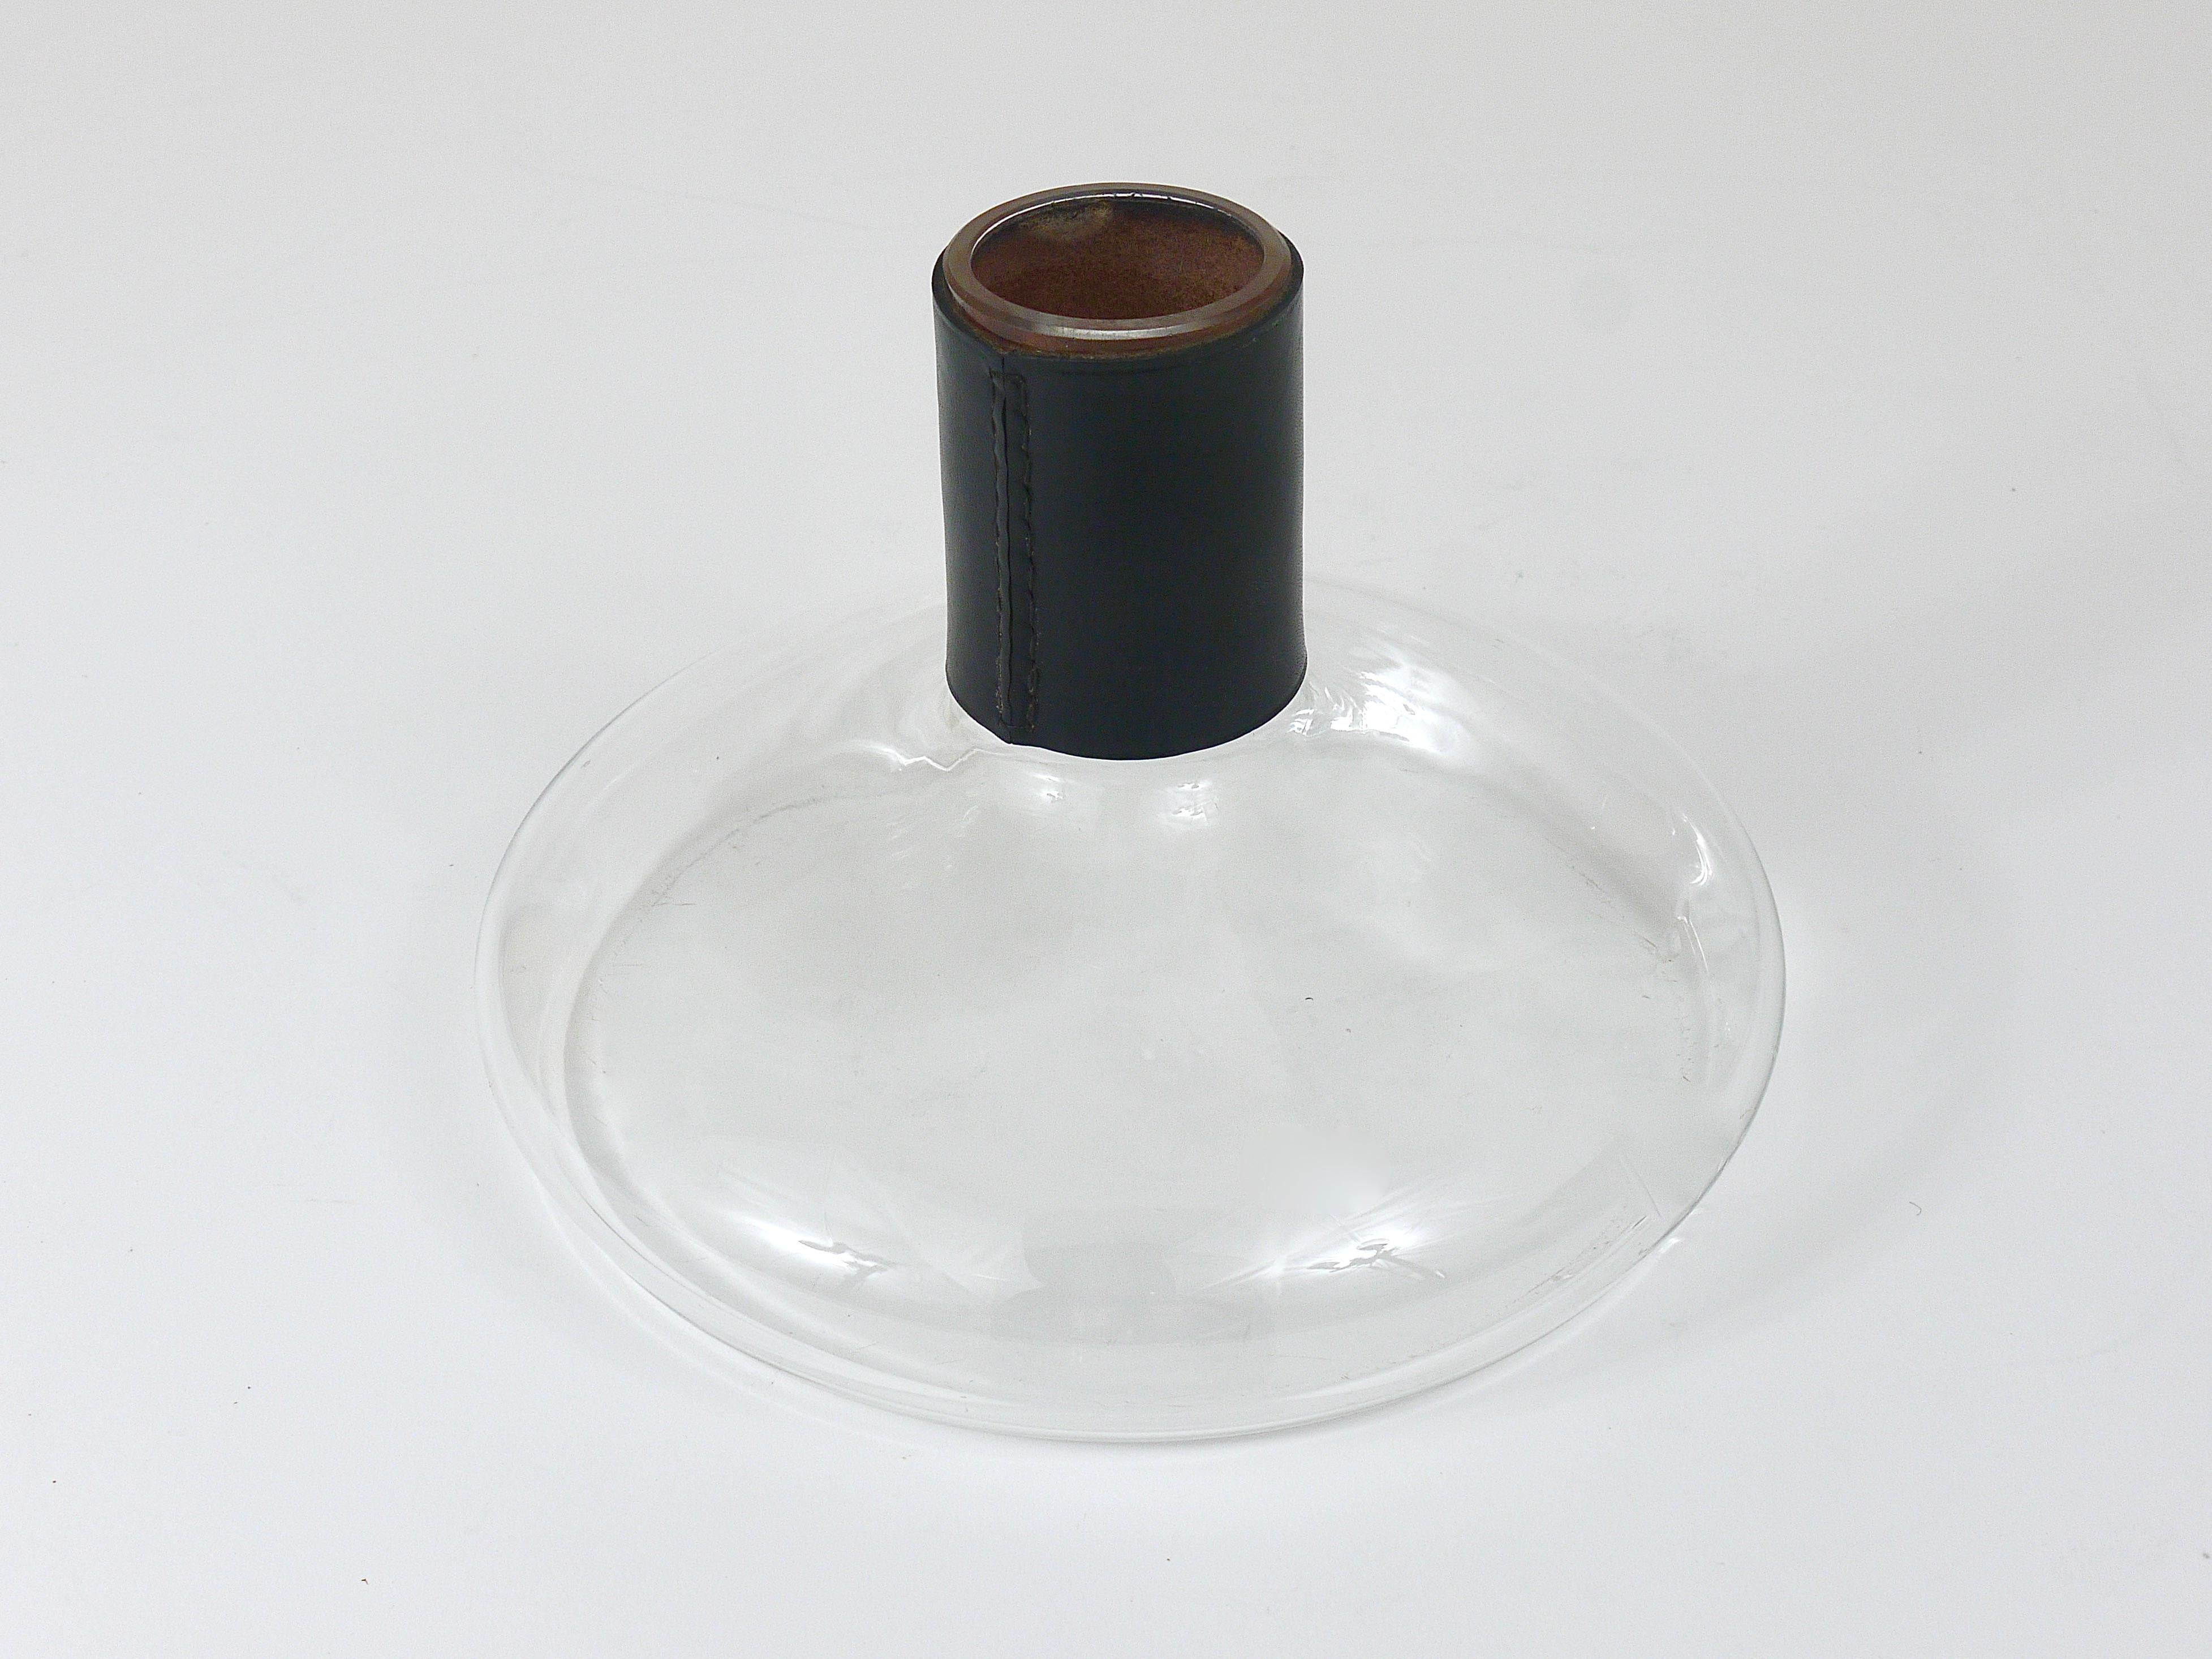 Carl Aubock Vase or Decanter with Black Leather Top, Midcentury, Austria, 1950s For Sale 1